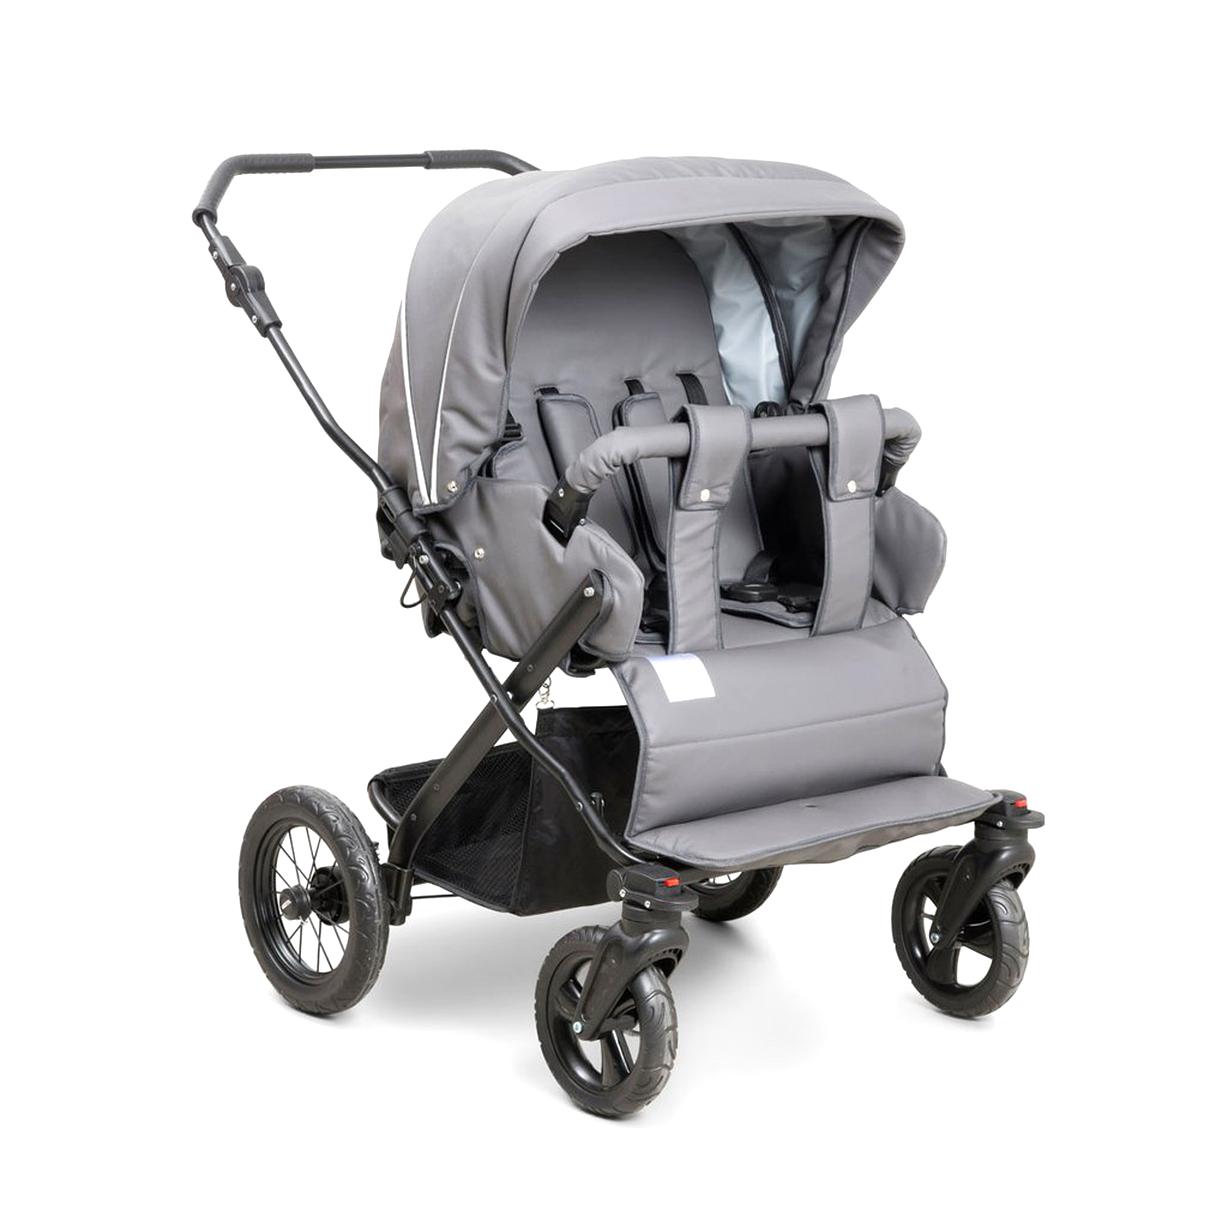 second hand double buggy for sale